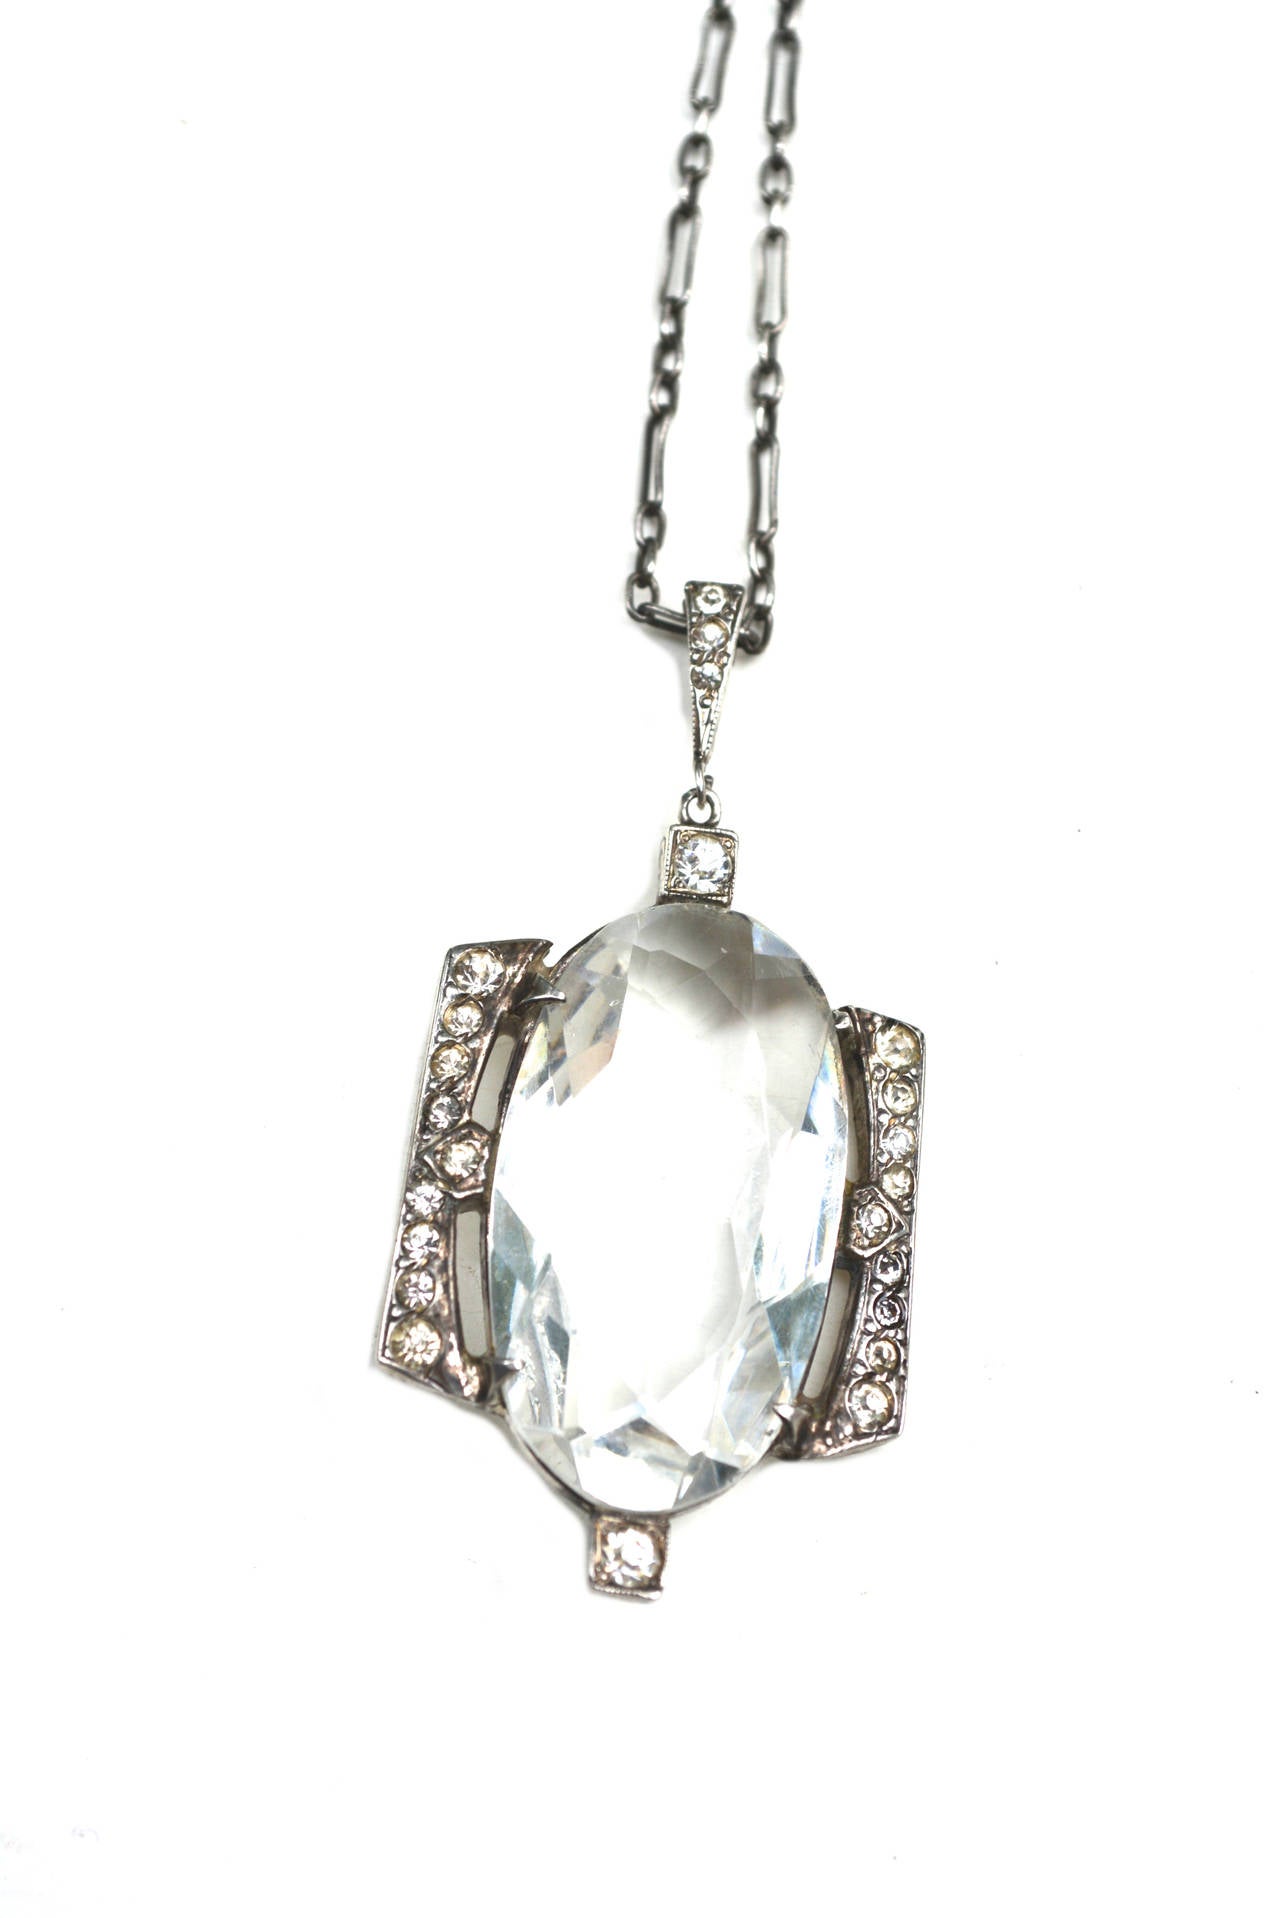 Women's 1920s Glass and Sterling Necklace